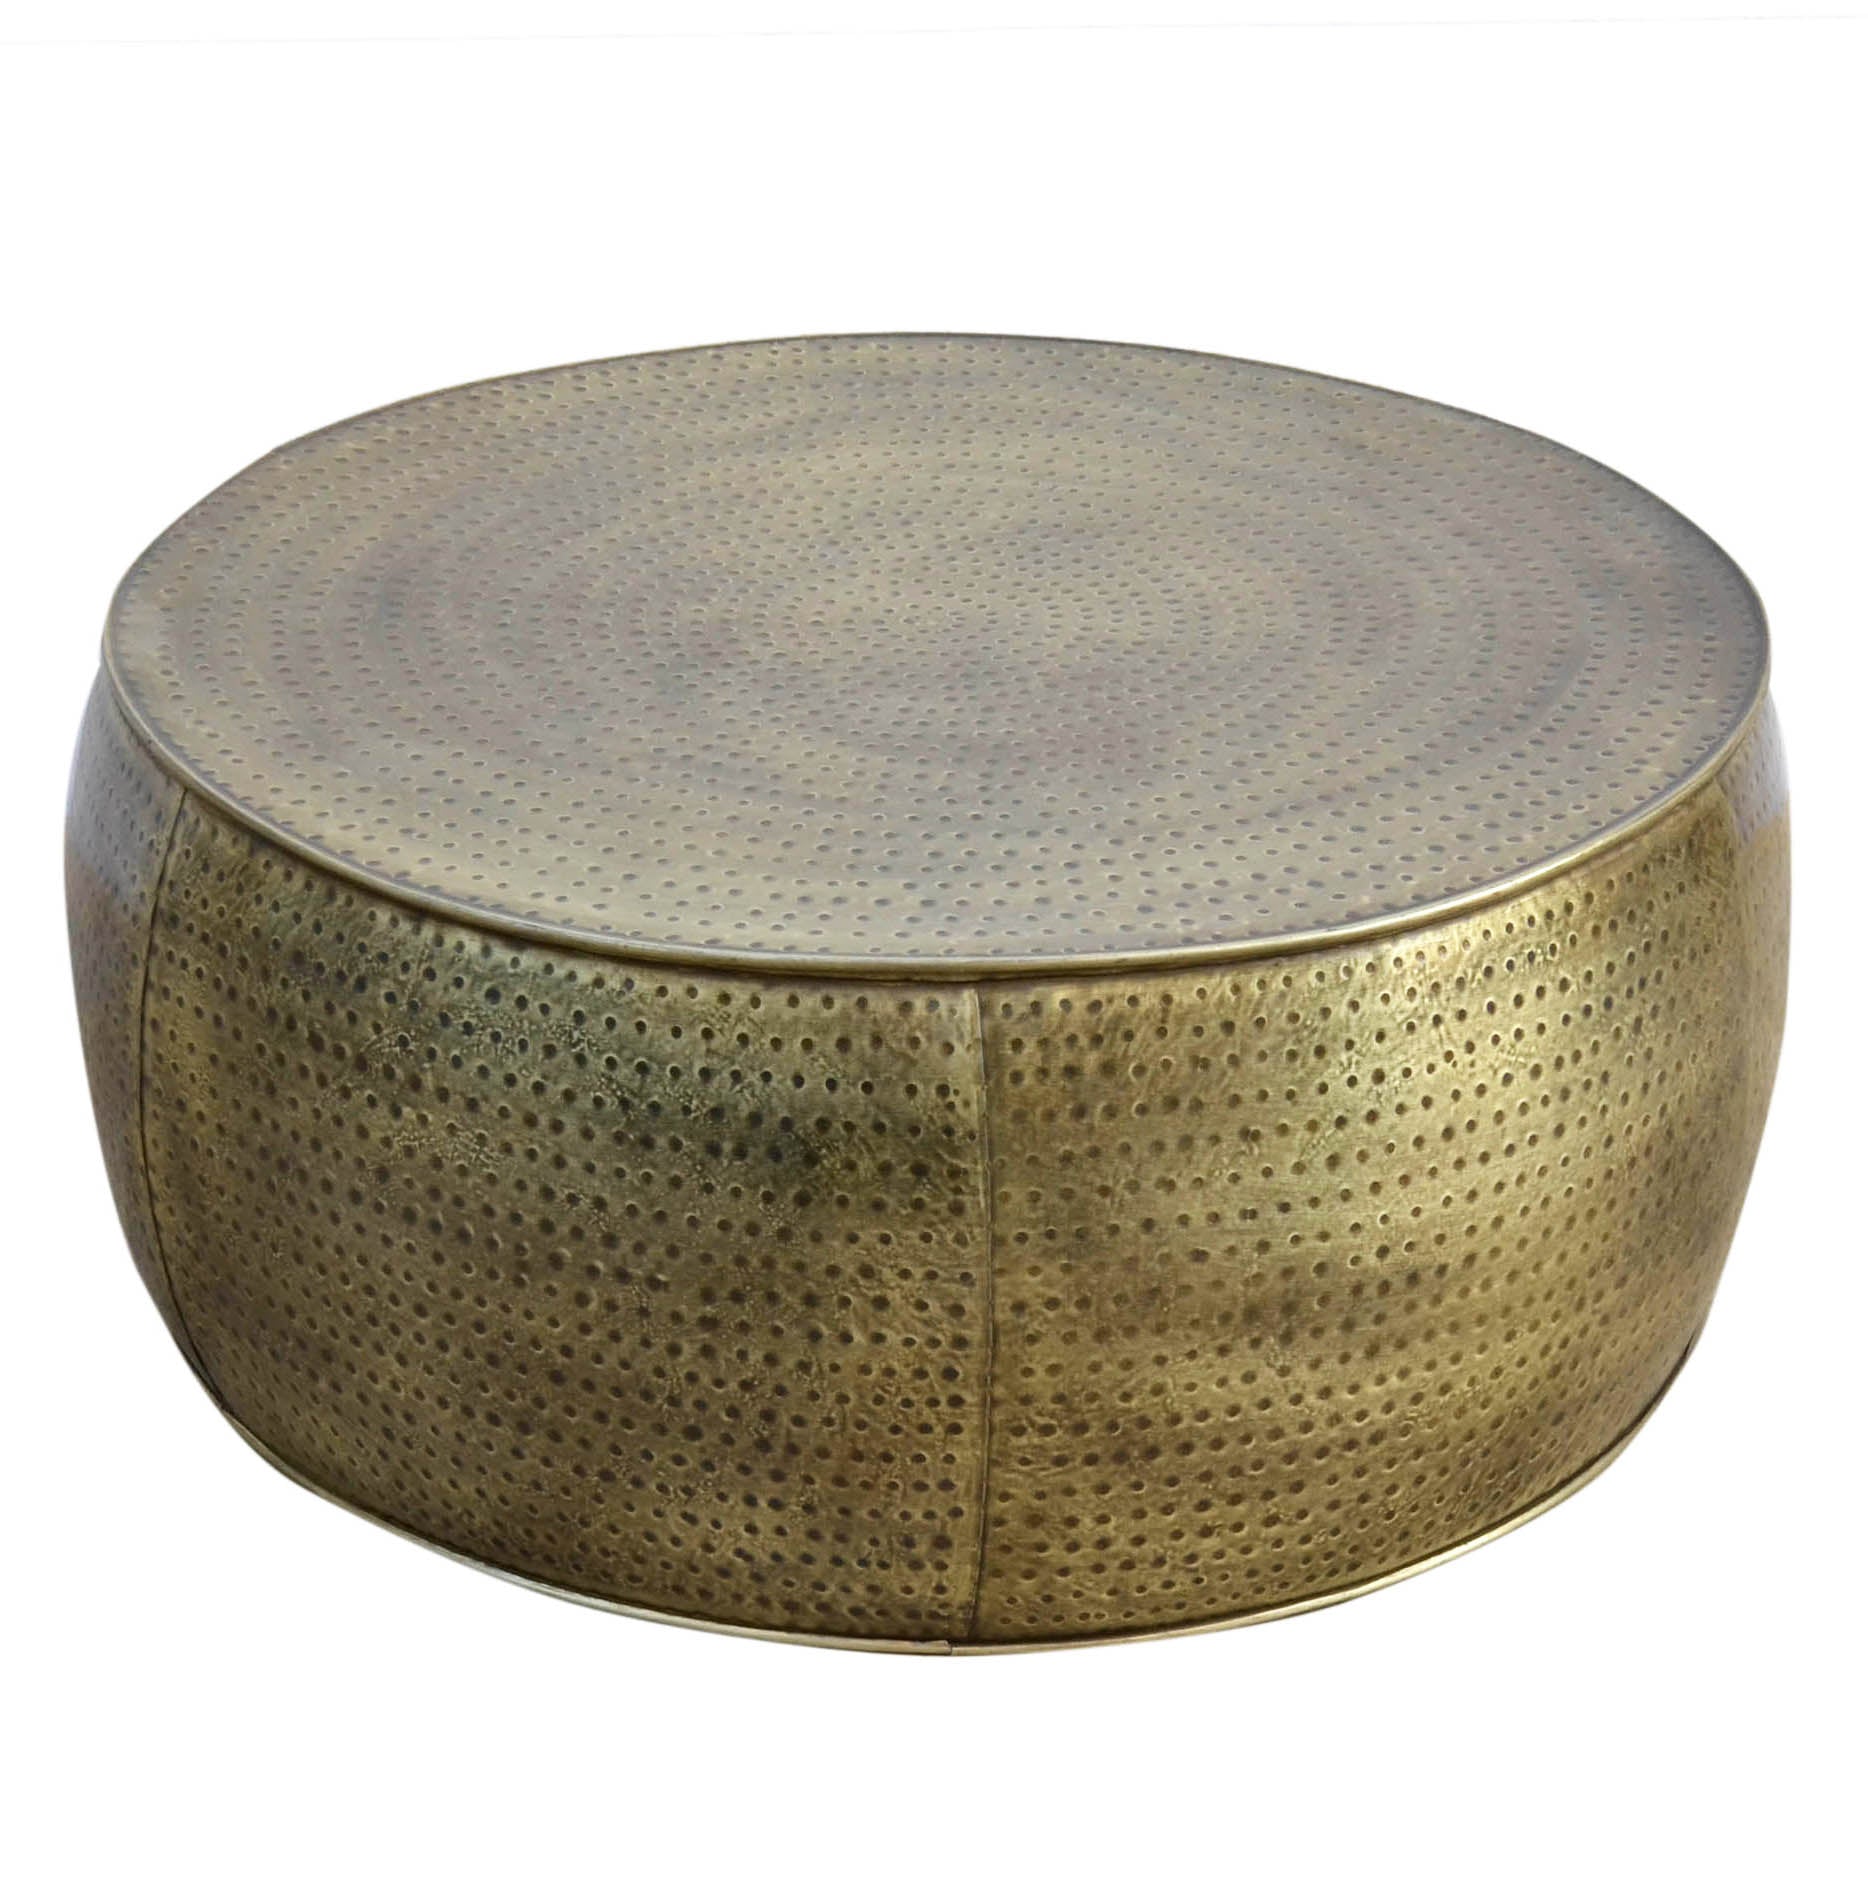 Brass Look Drum Coffee Table - decorstore